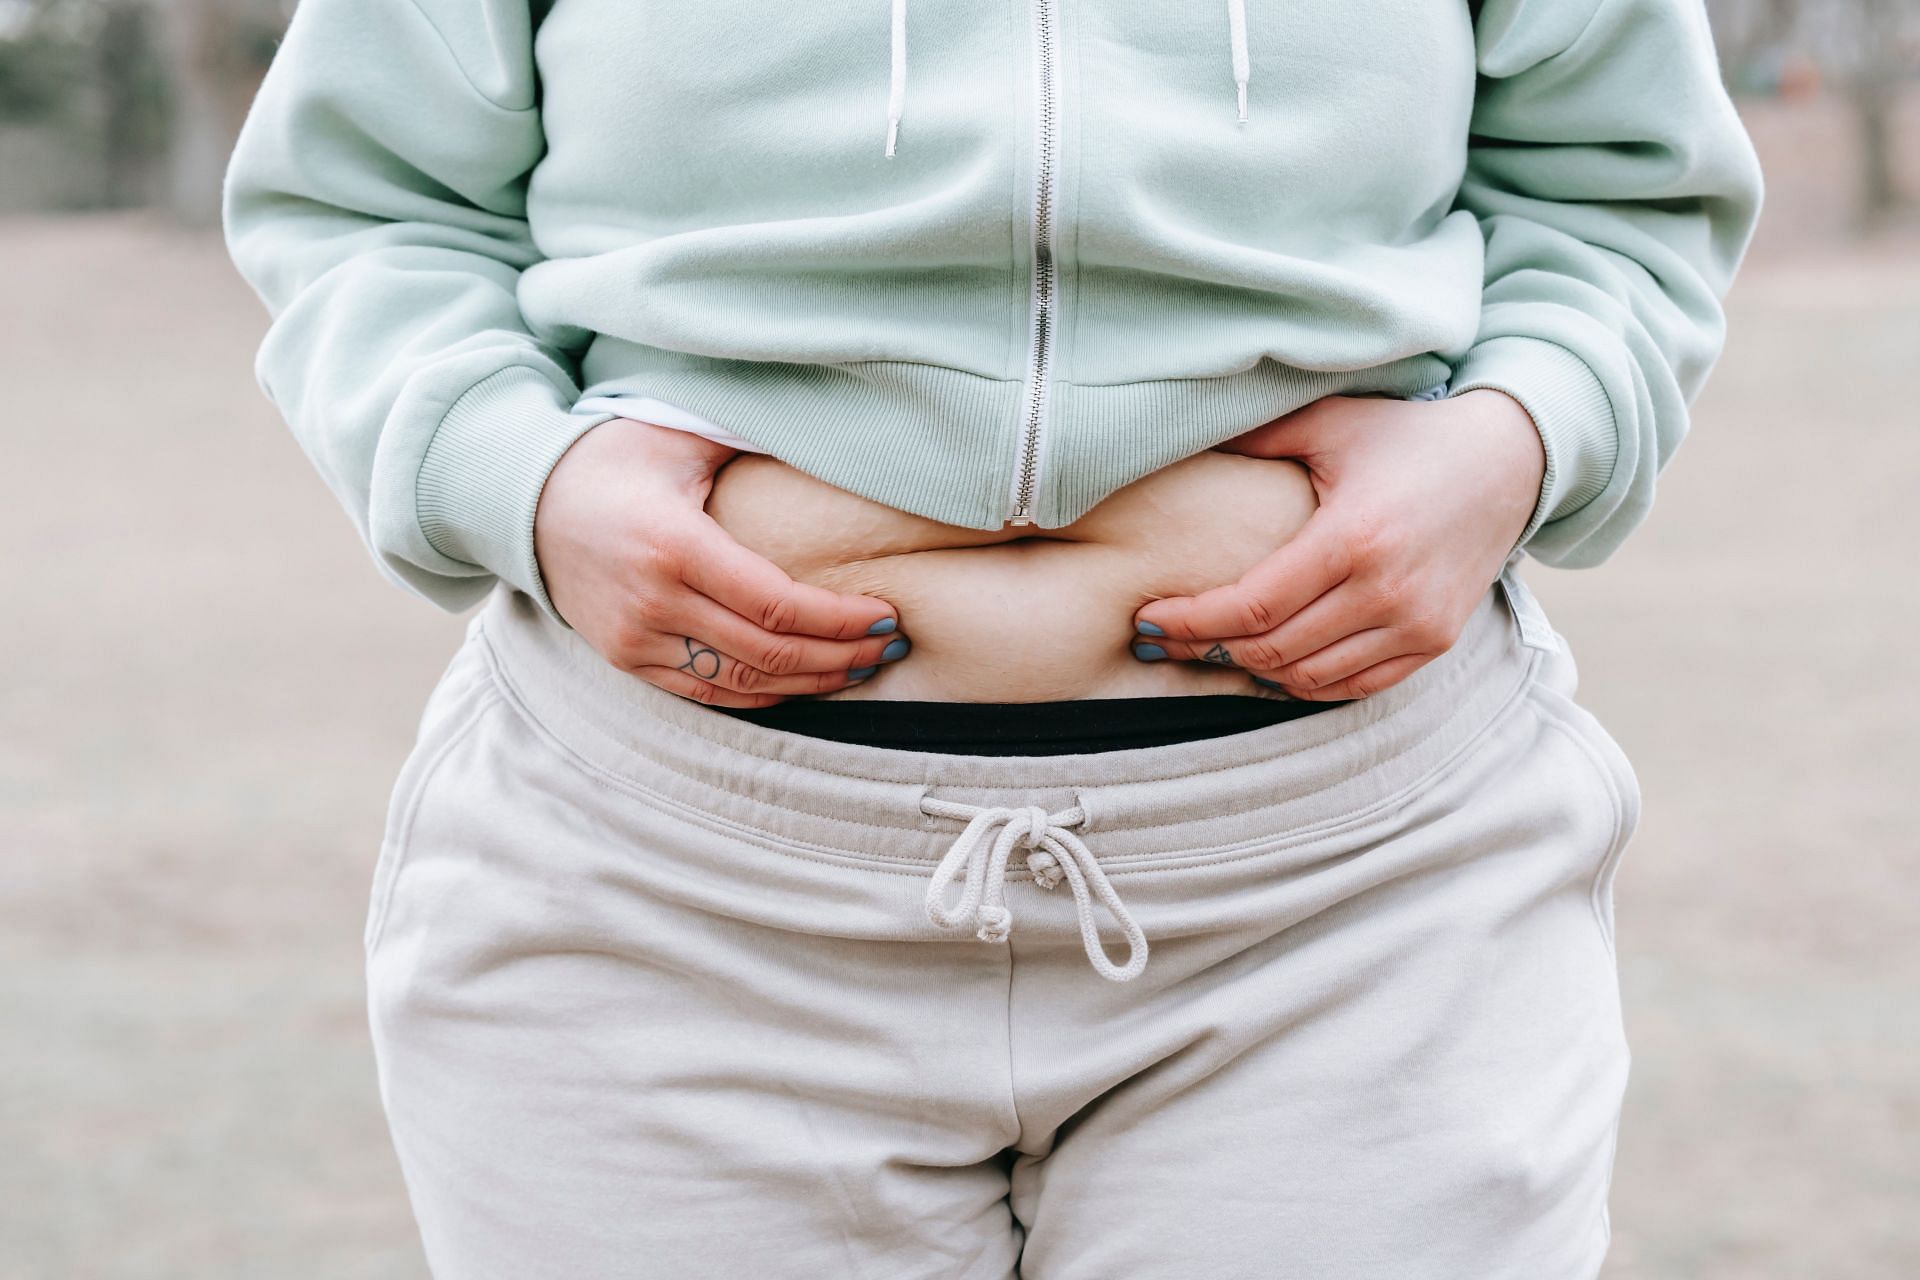 Obesity is one of the most common reasons for people getting diabetes, blood pressure and heart disease (Image via Pexels @Andrea Ayrton)